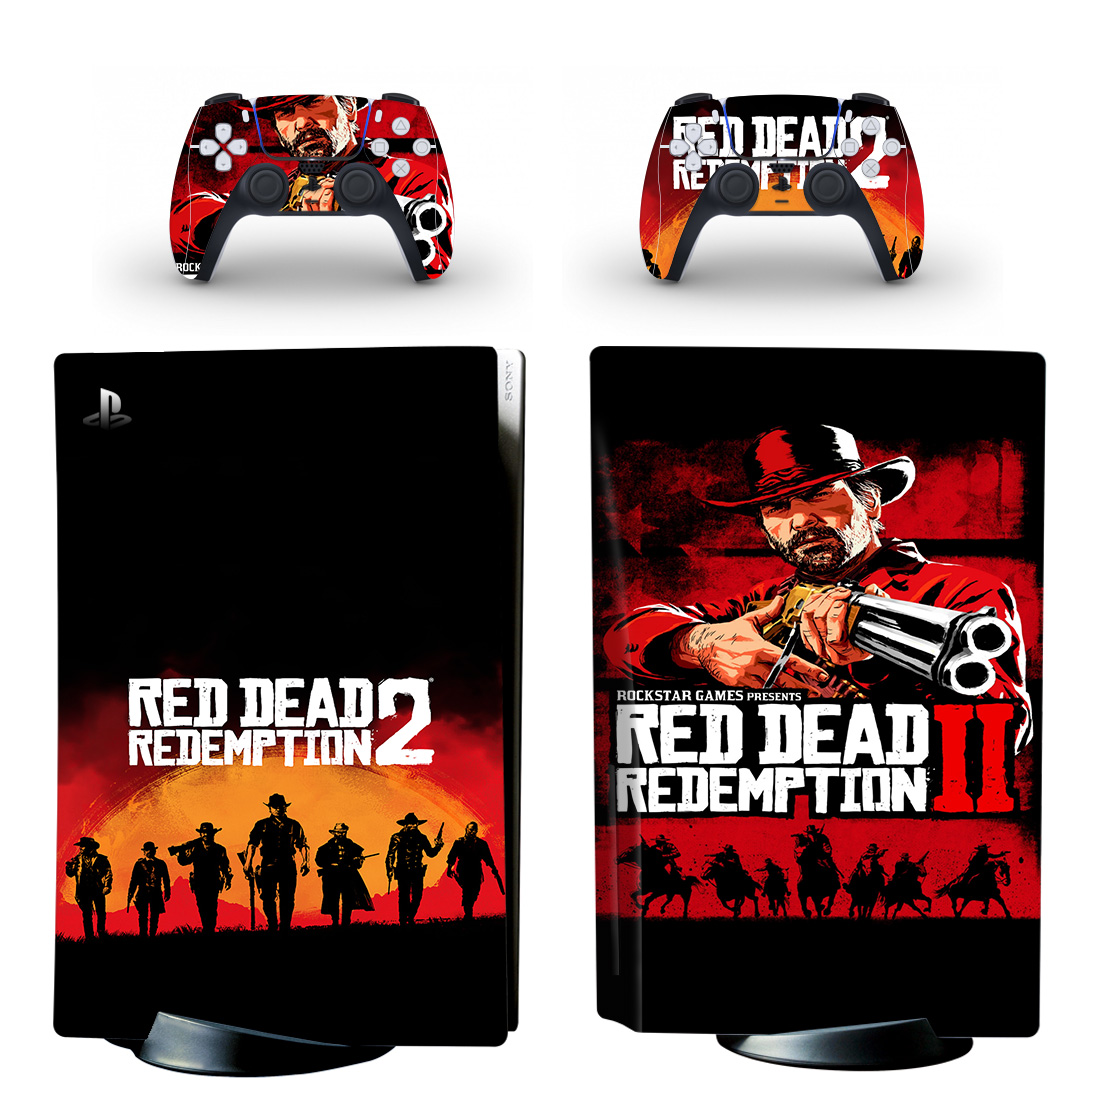 Red Dead Redemption 2 Skin Sticker For PS5 Skin And Controllers Design 2